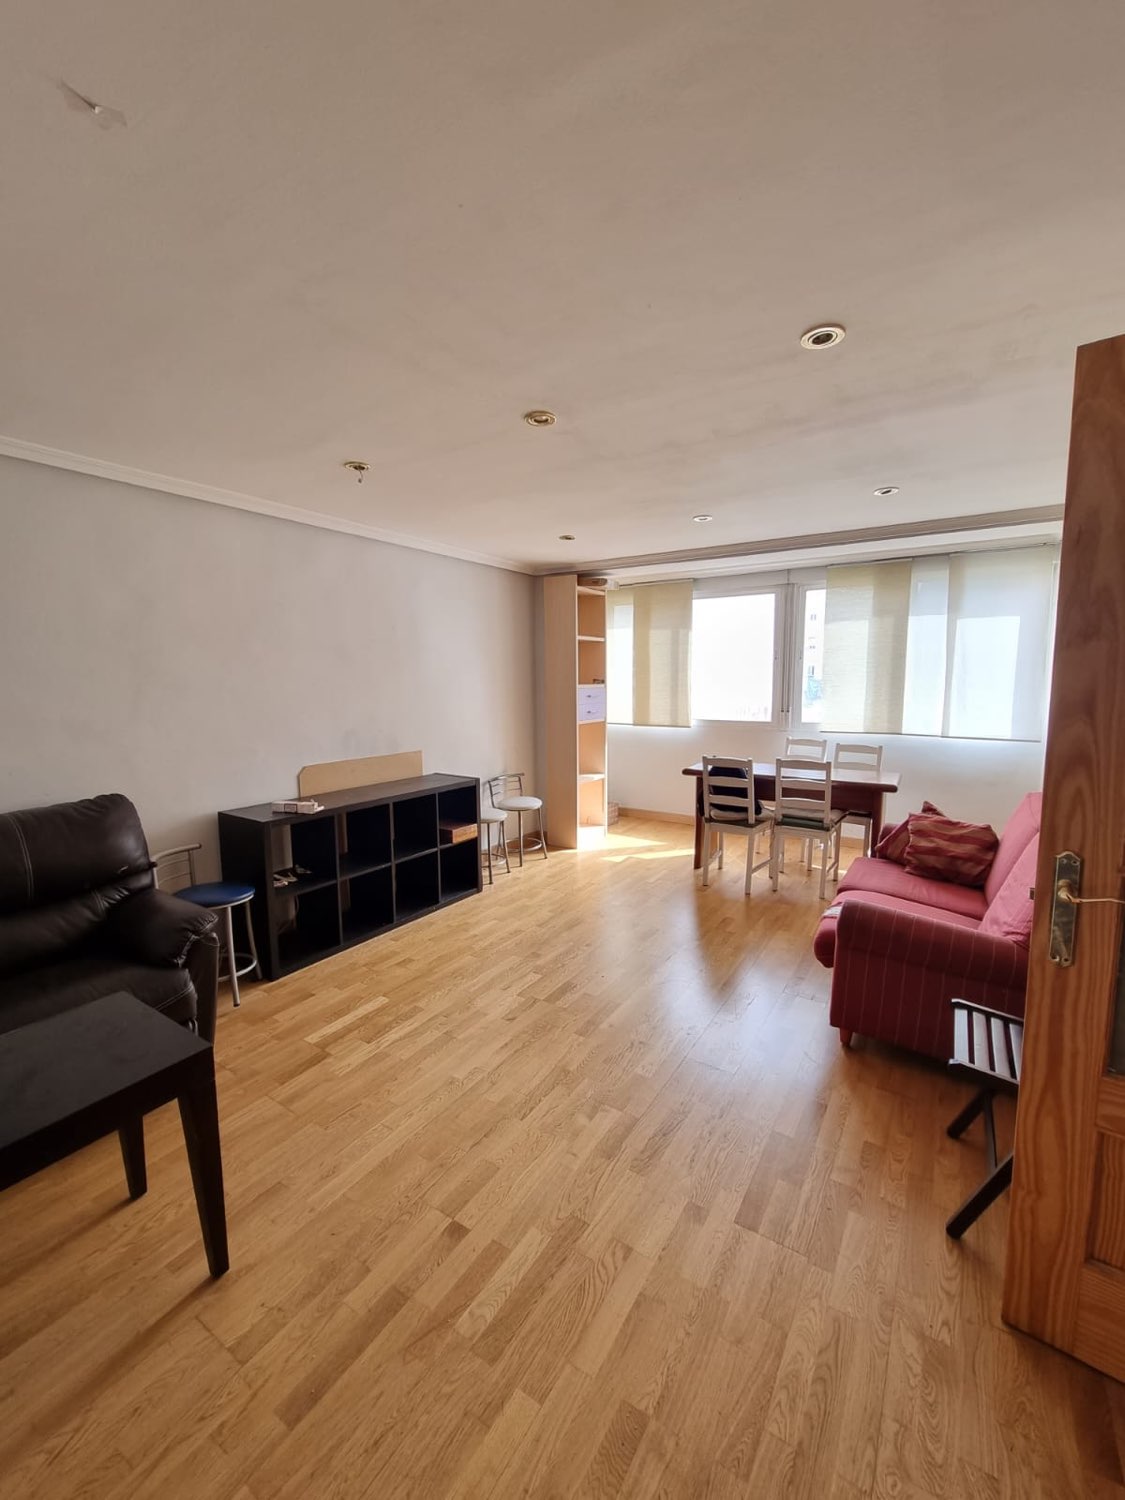 Flat for sale in Móstoles